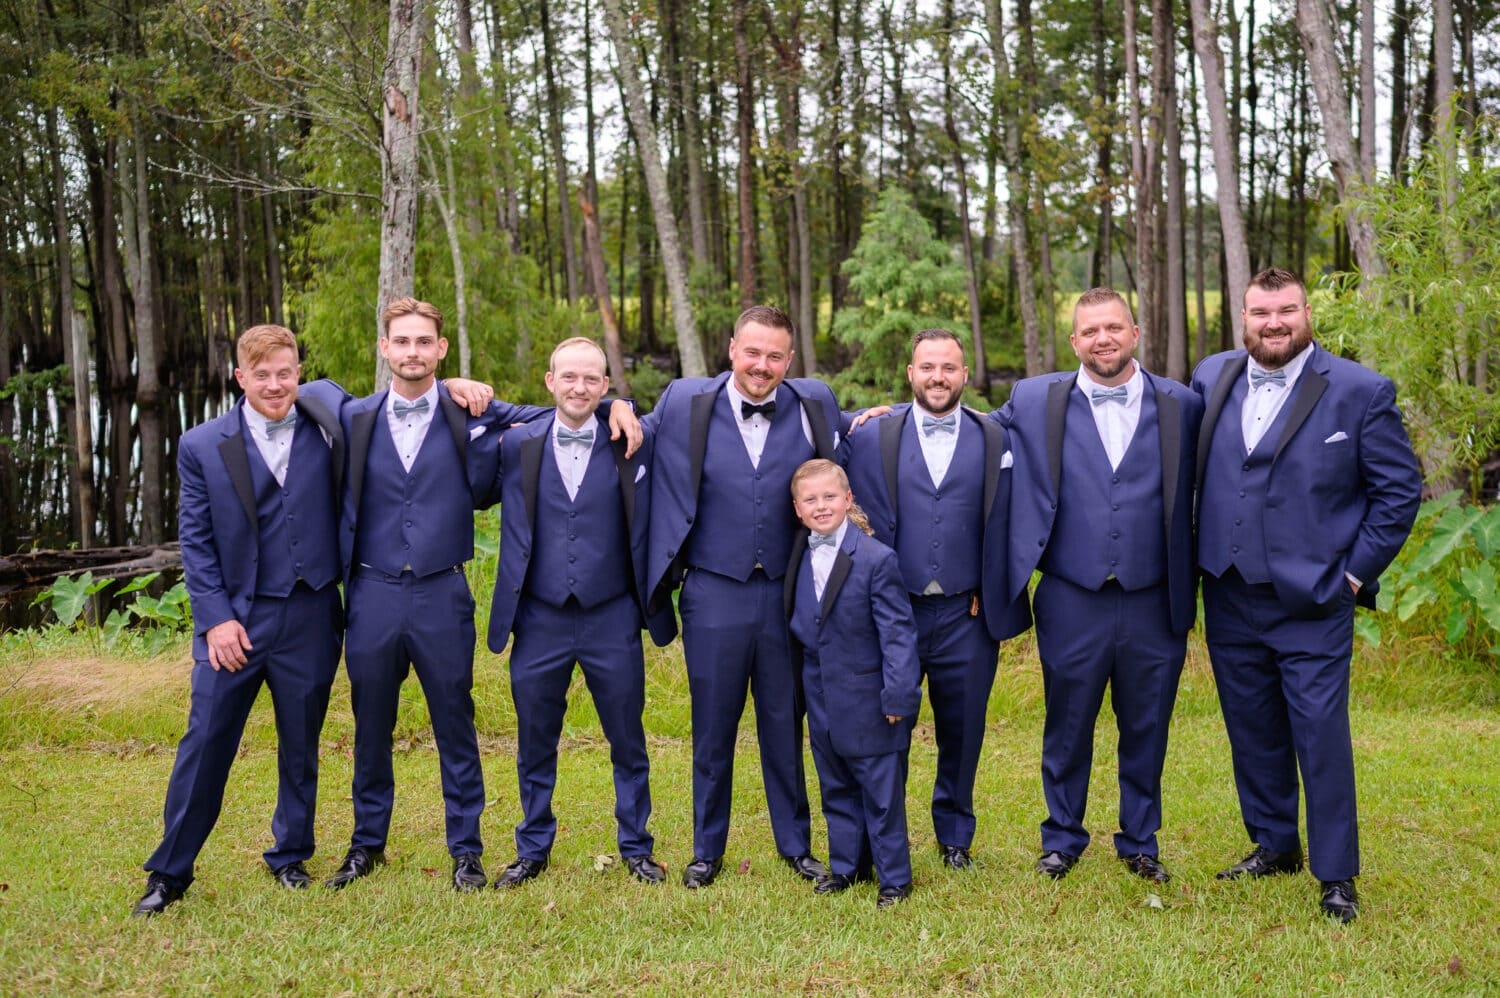 Groom with groomsmen before the ceremony - Wildhorse at Parker Farms